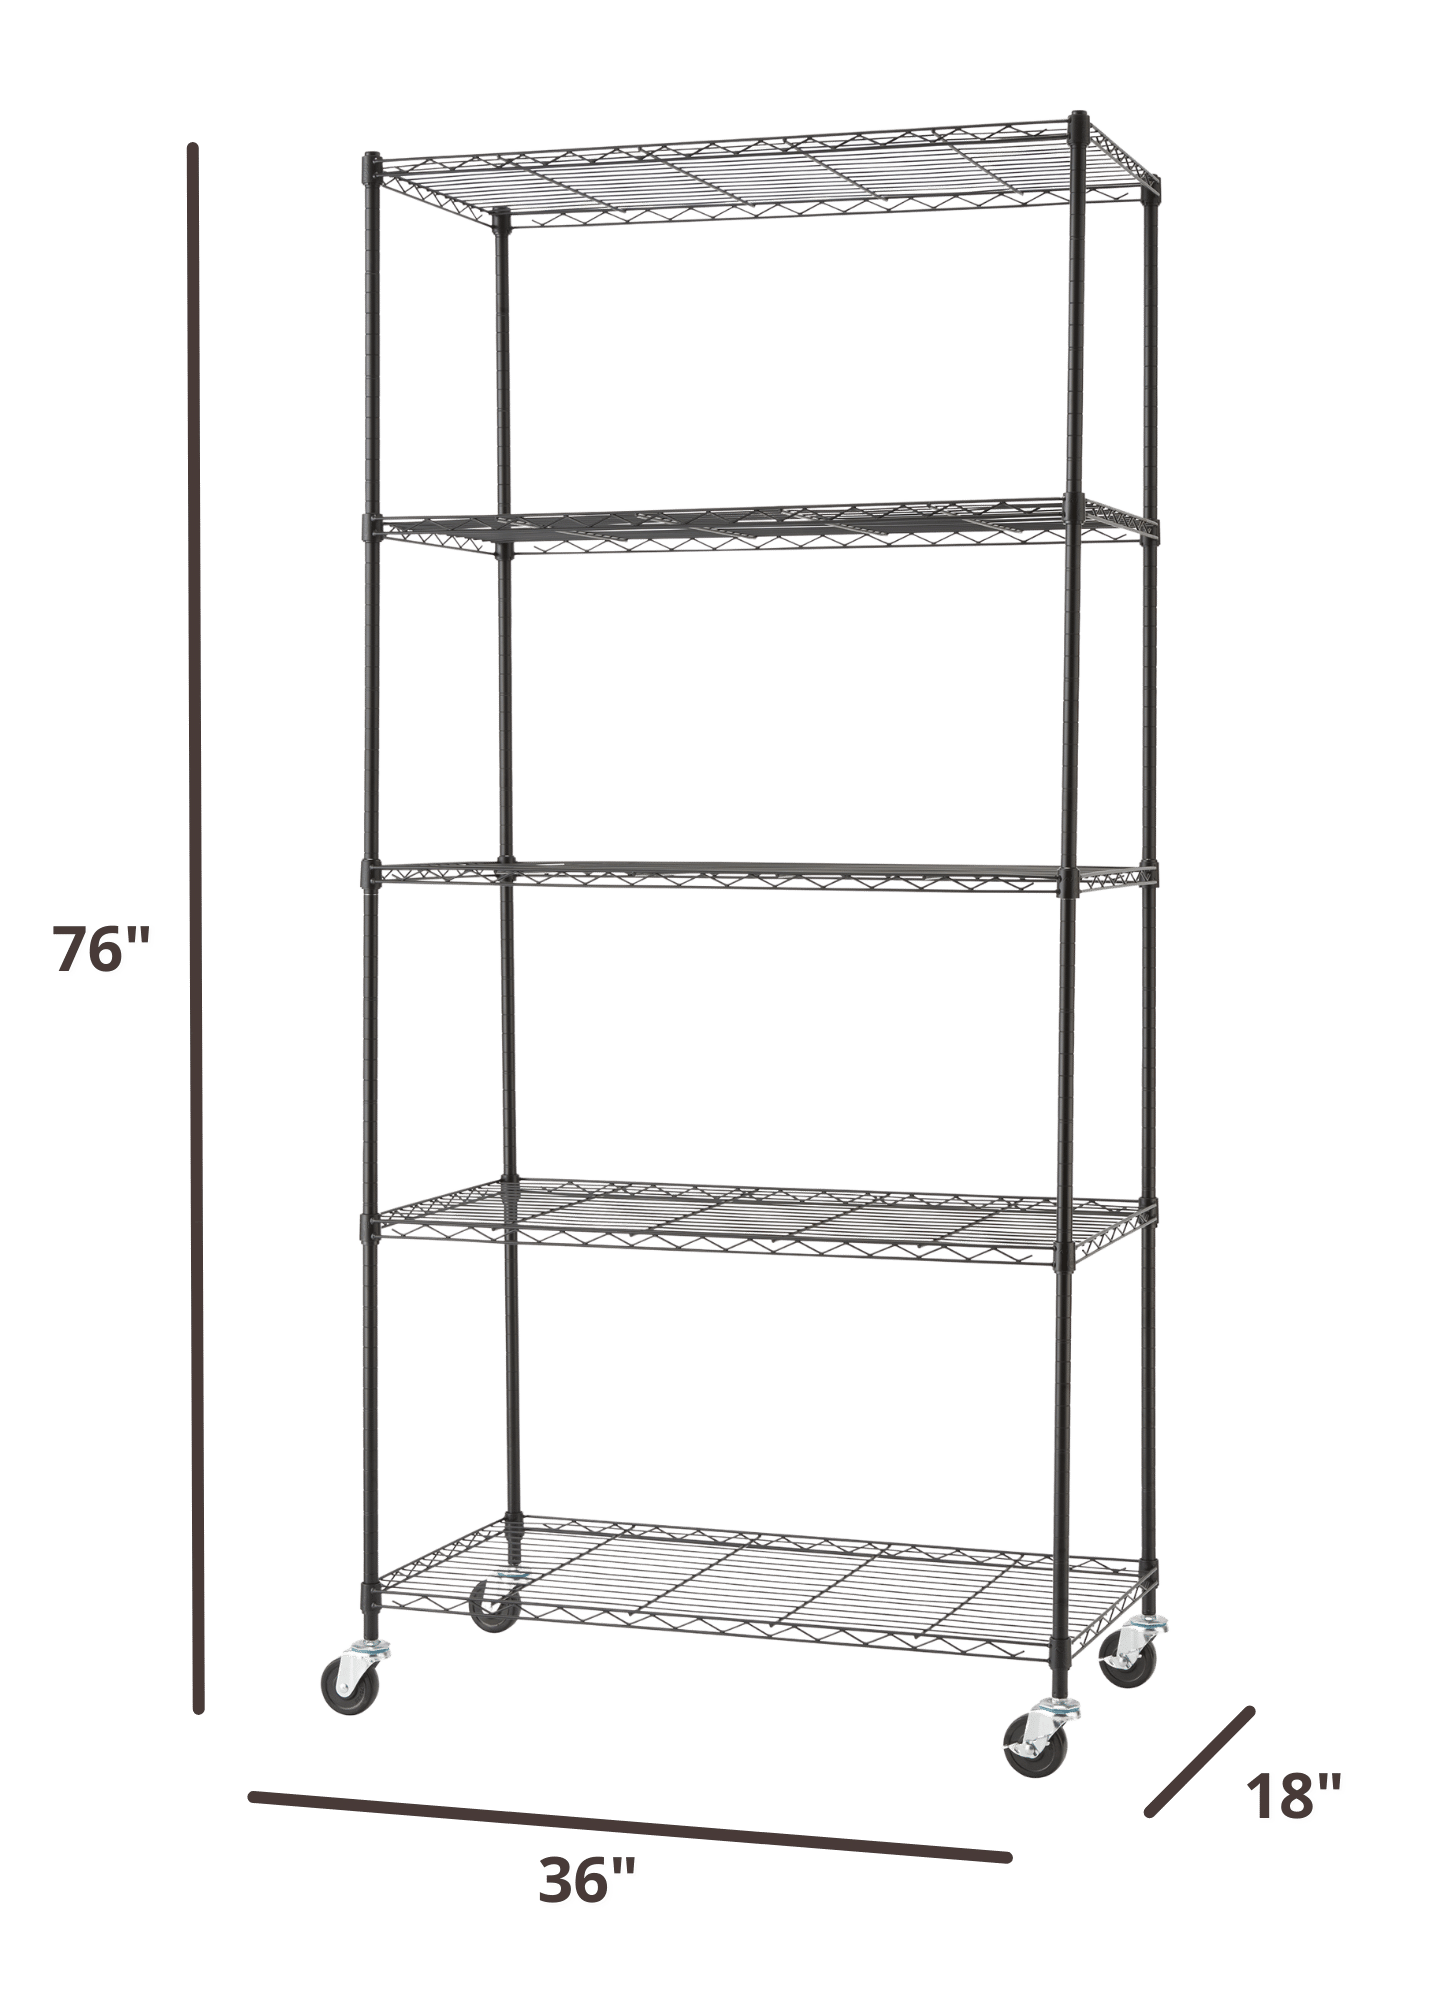 76 inches tall by 36 inches wide black wire shelving rack with wheels